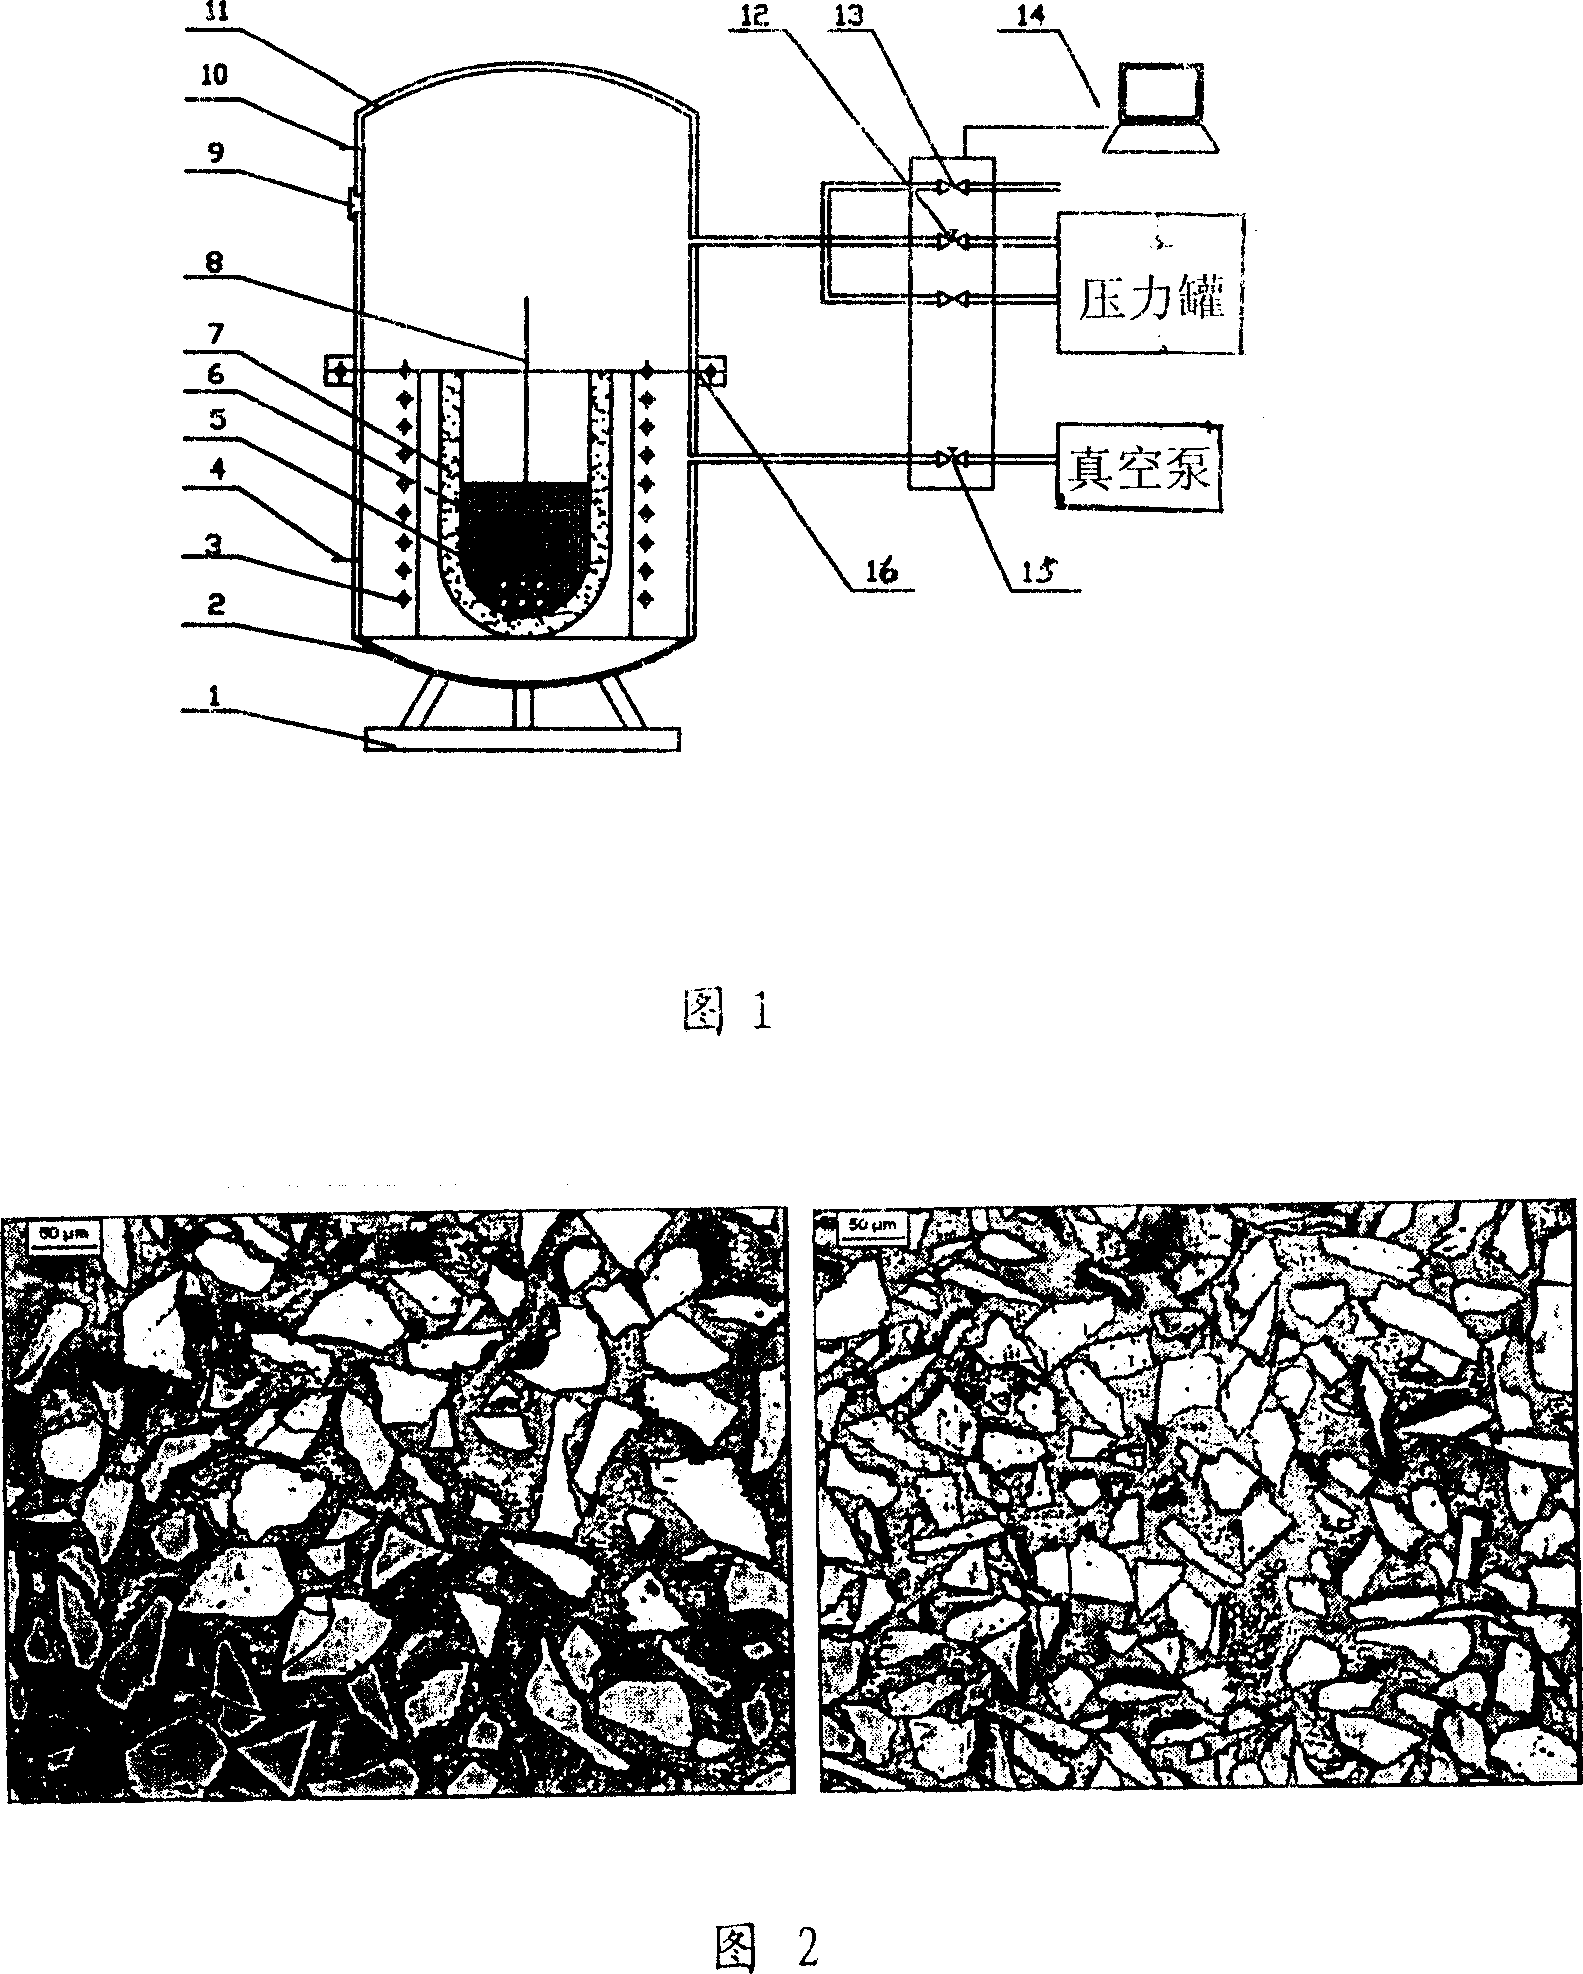 Process for preparing particle-reinforced magnesium-base composite material by vacuum pressure impregnation